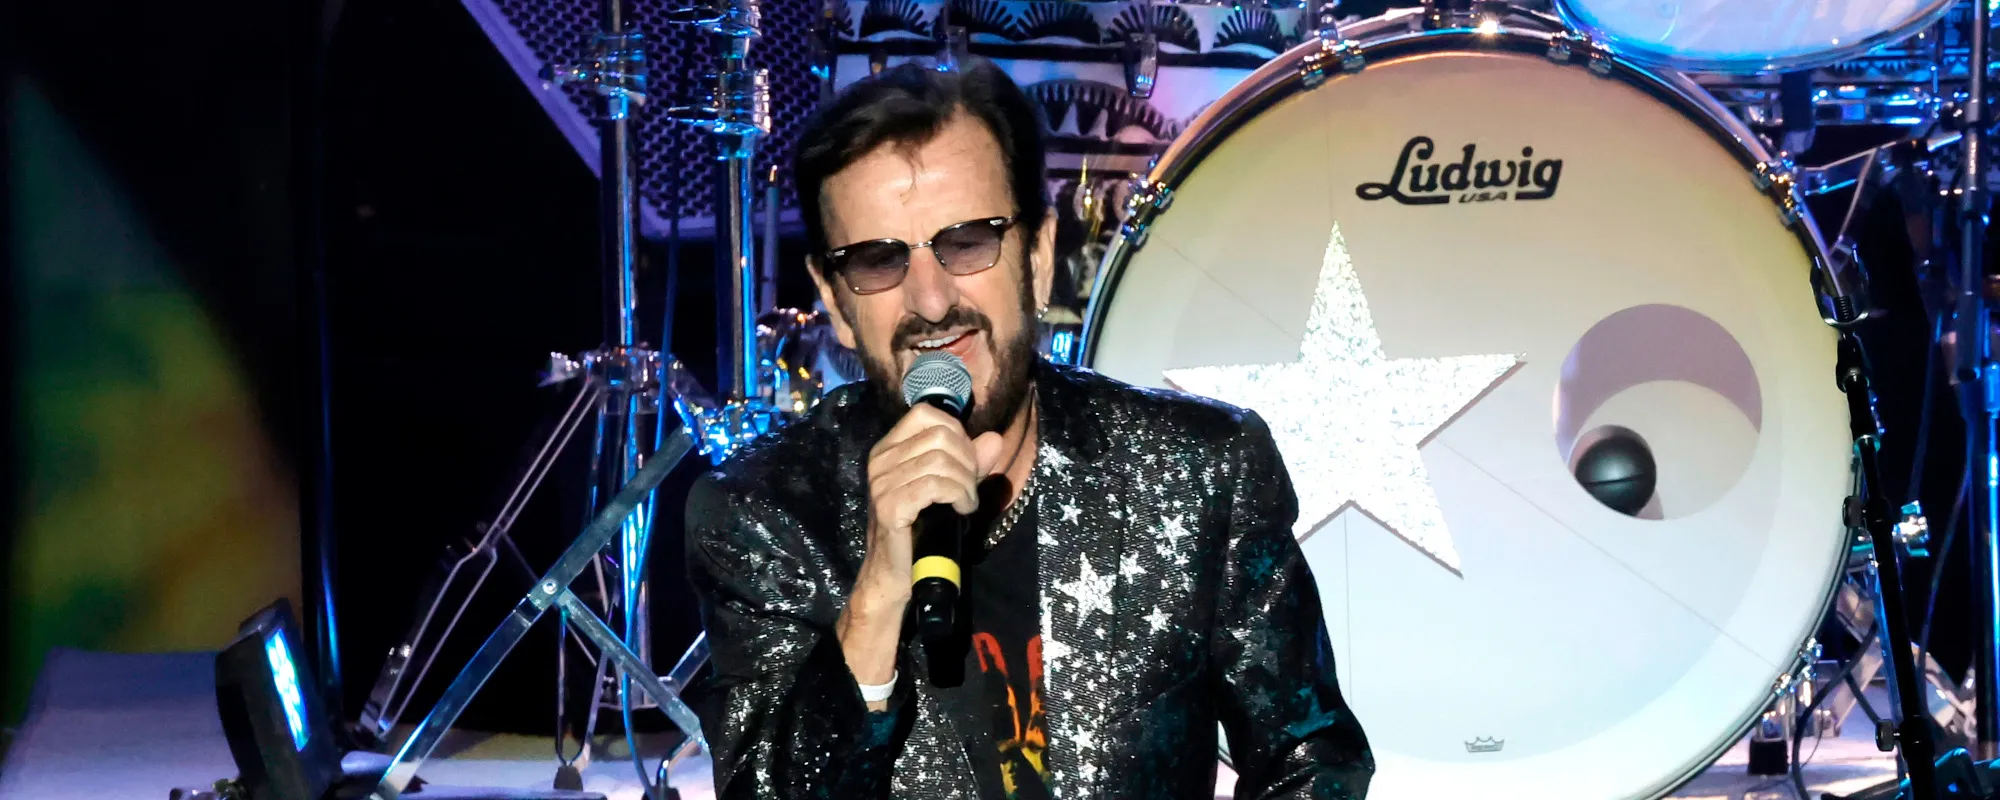 2 Songs You Didn’t Know Ringo Starr Wrote for the Beatles